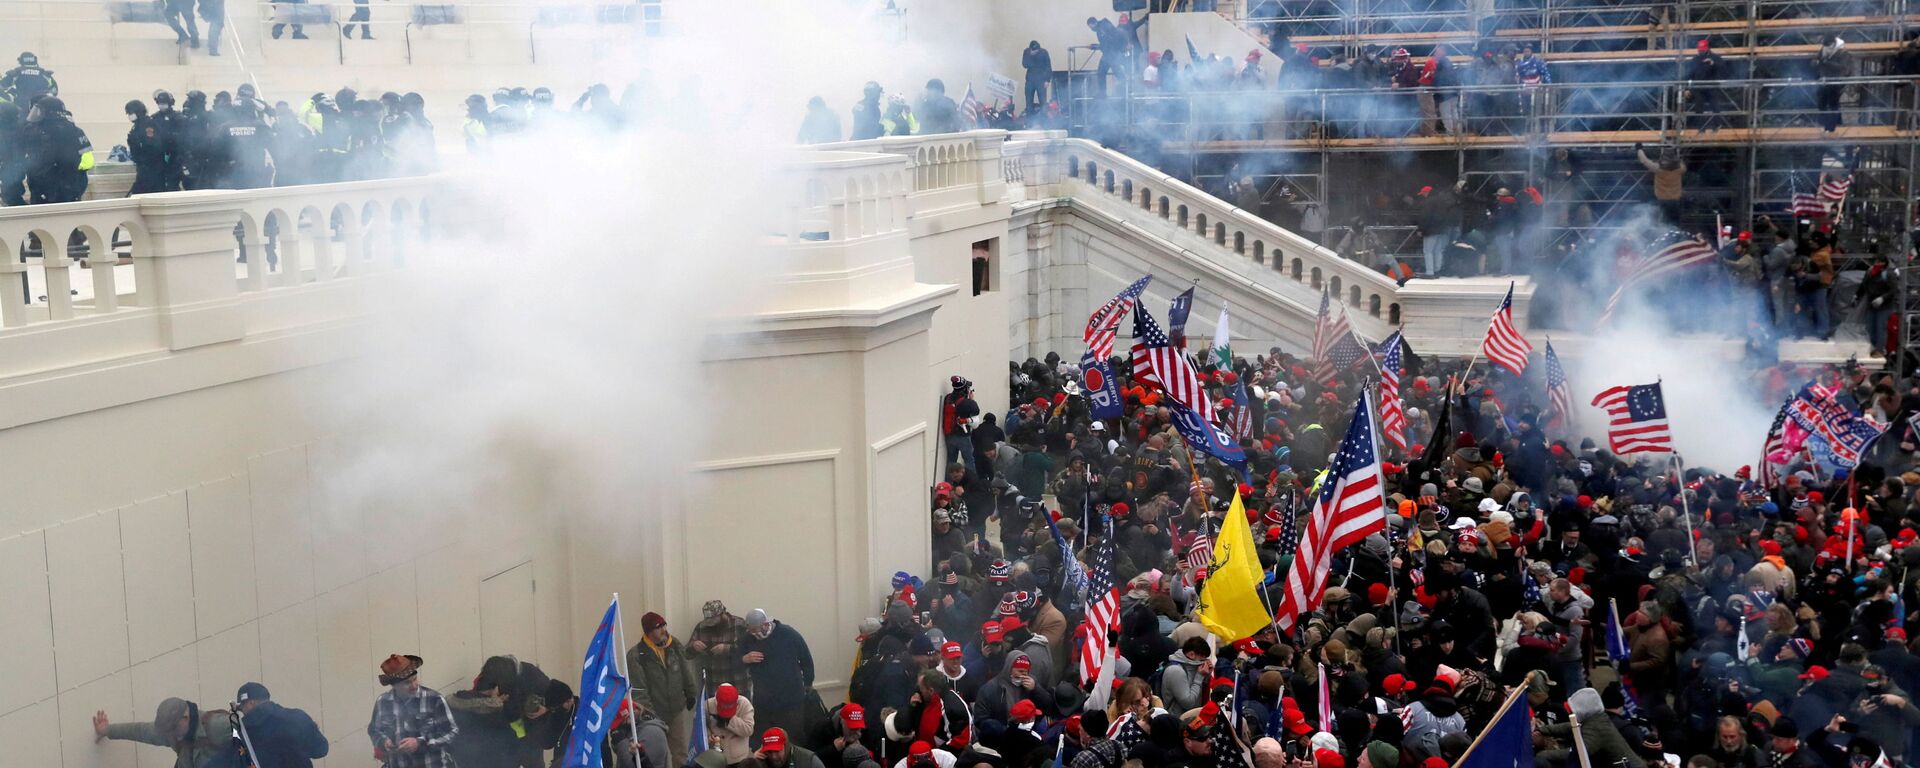 Police release tear gas into a crowd of pro-Trump protesters during clashes at a rally to contest the certification of the 2020 U.S. presidential election results by the U.S. Congress, at the U.S. Capitol Building in Washington, U.S, January 6, 2021. - Sputnik International, 1920, 20.10.2021